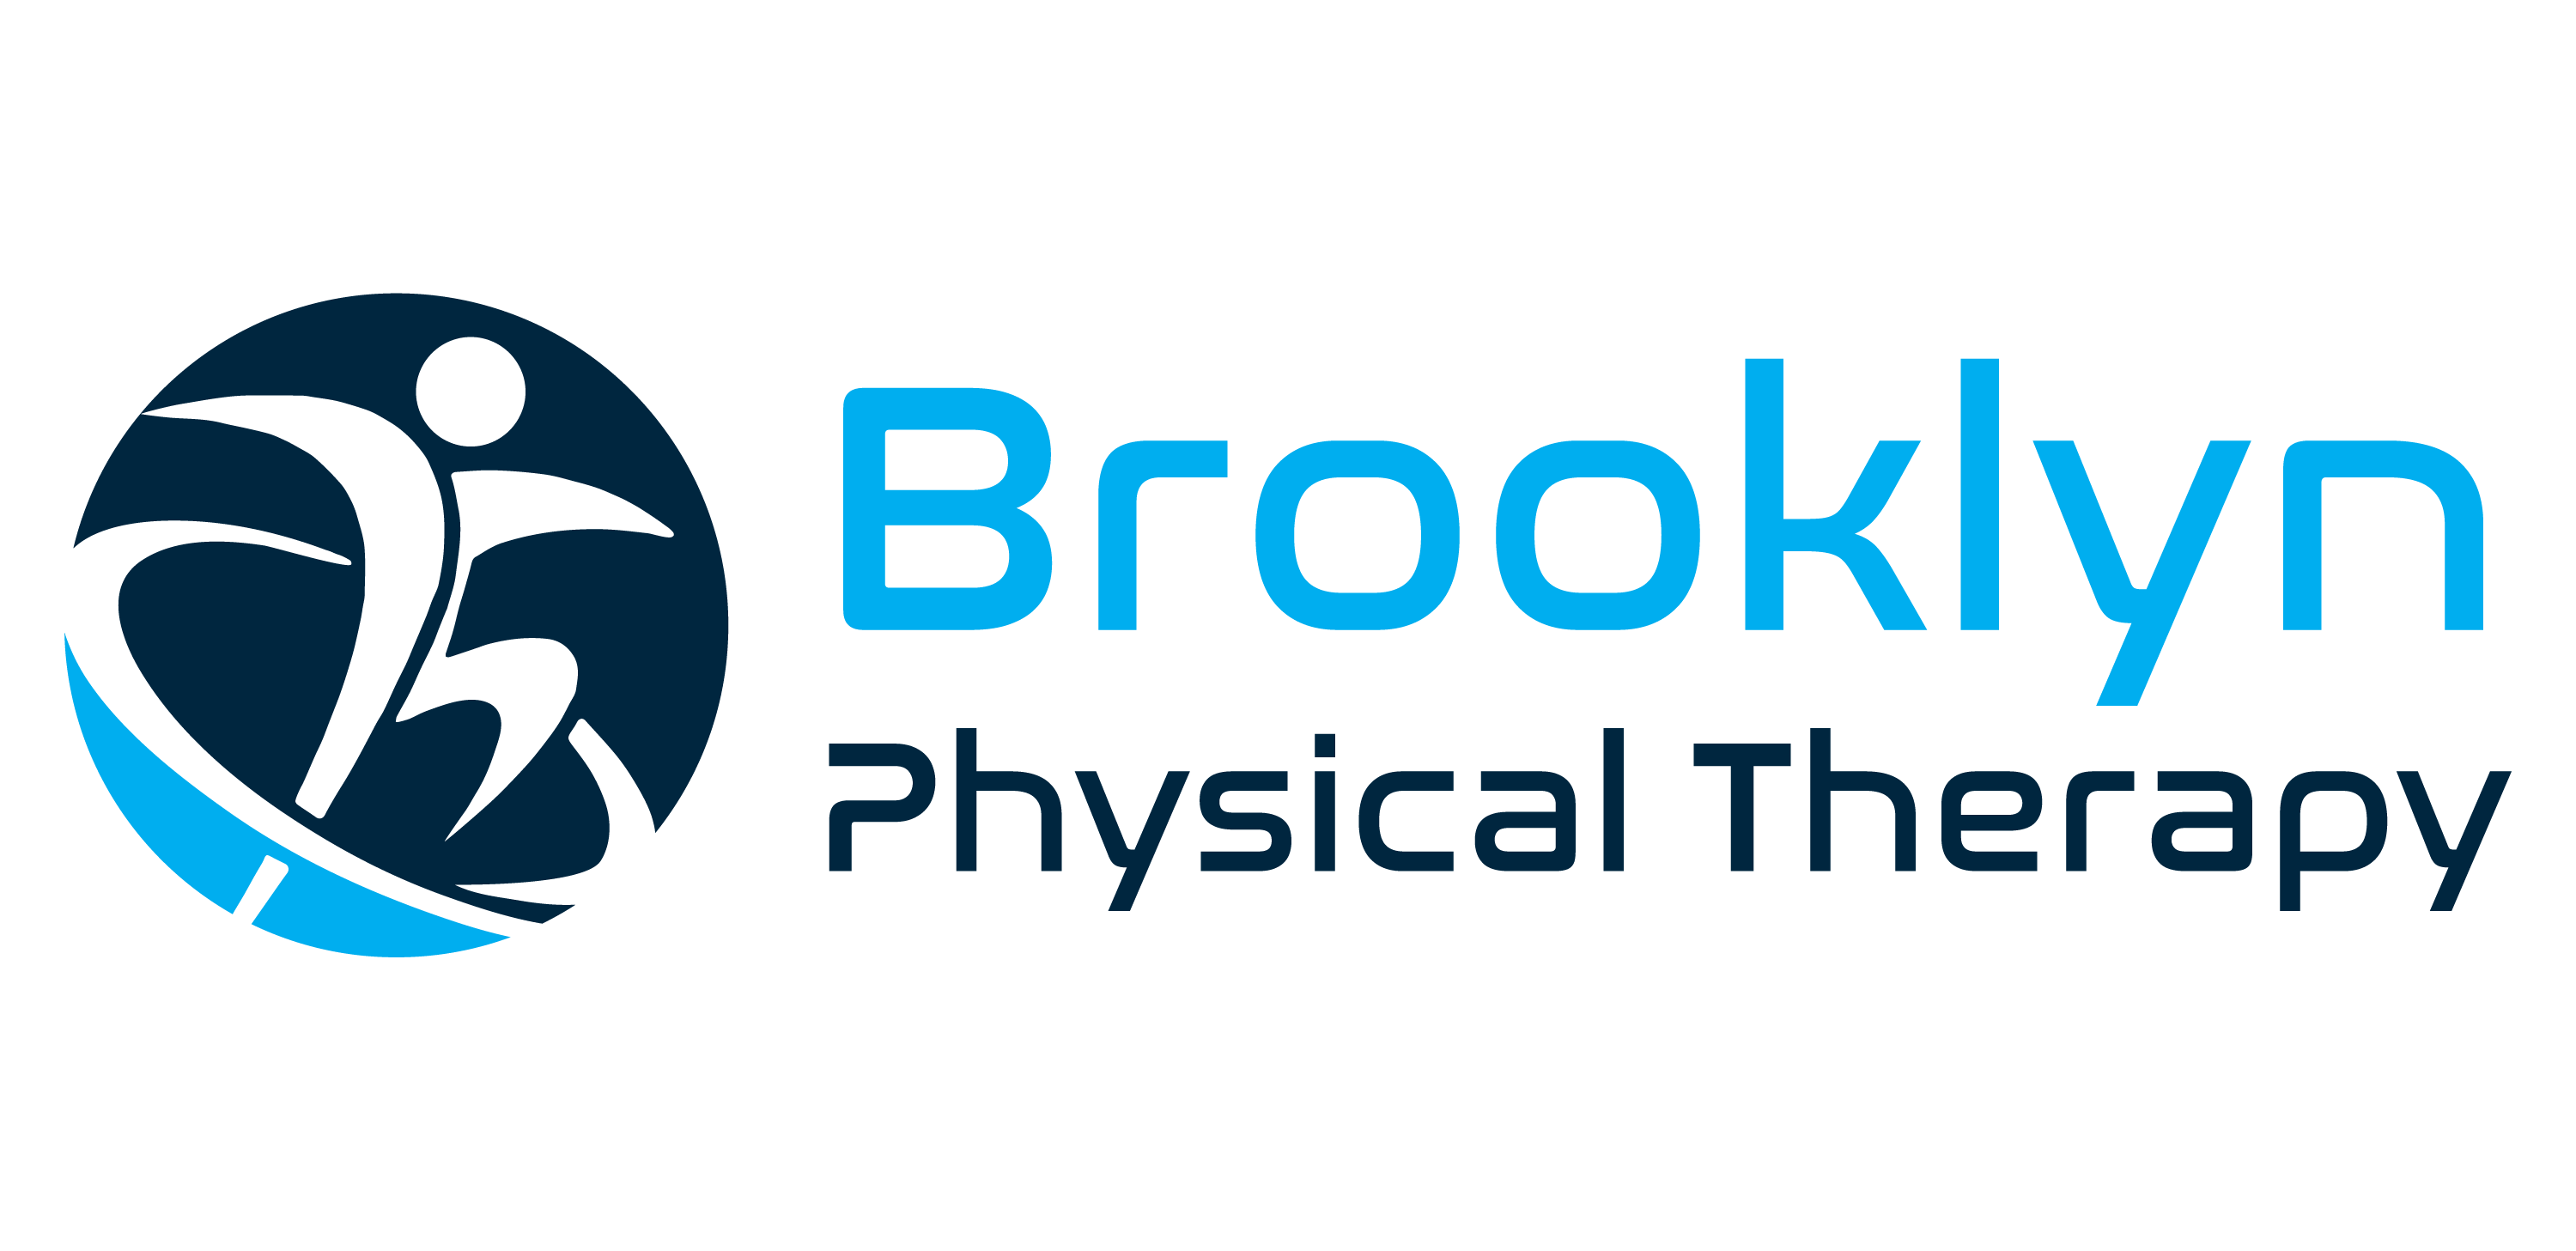 Where to find the best Physical Therapist in Brooklyn?